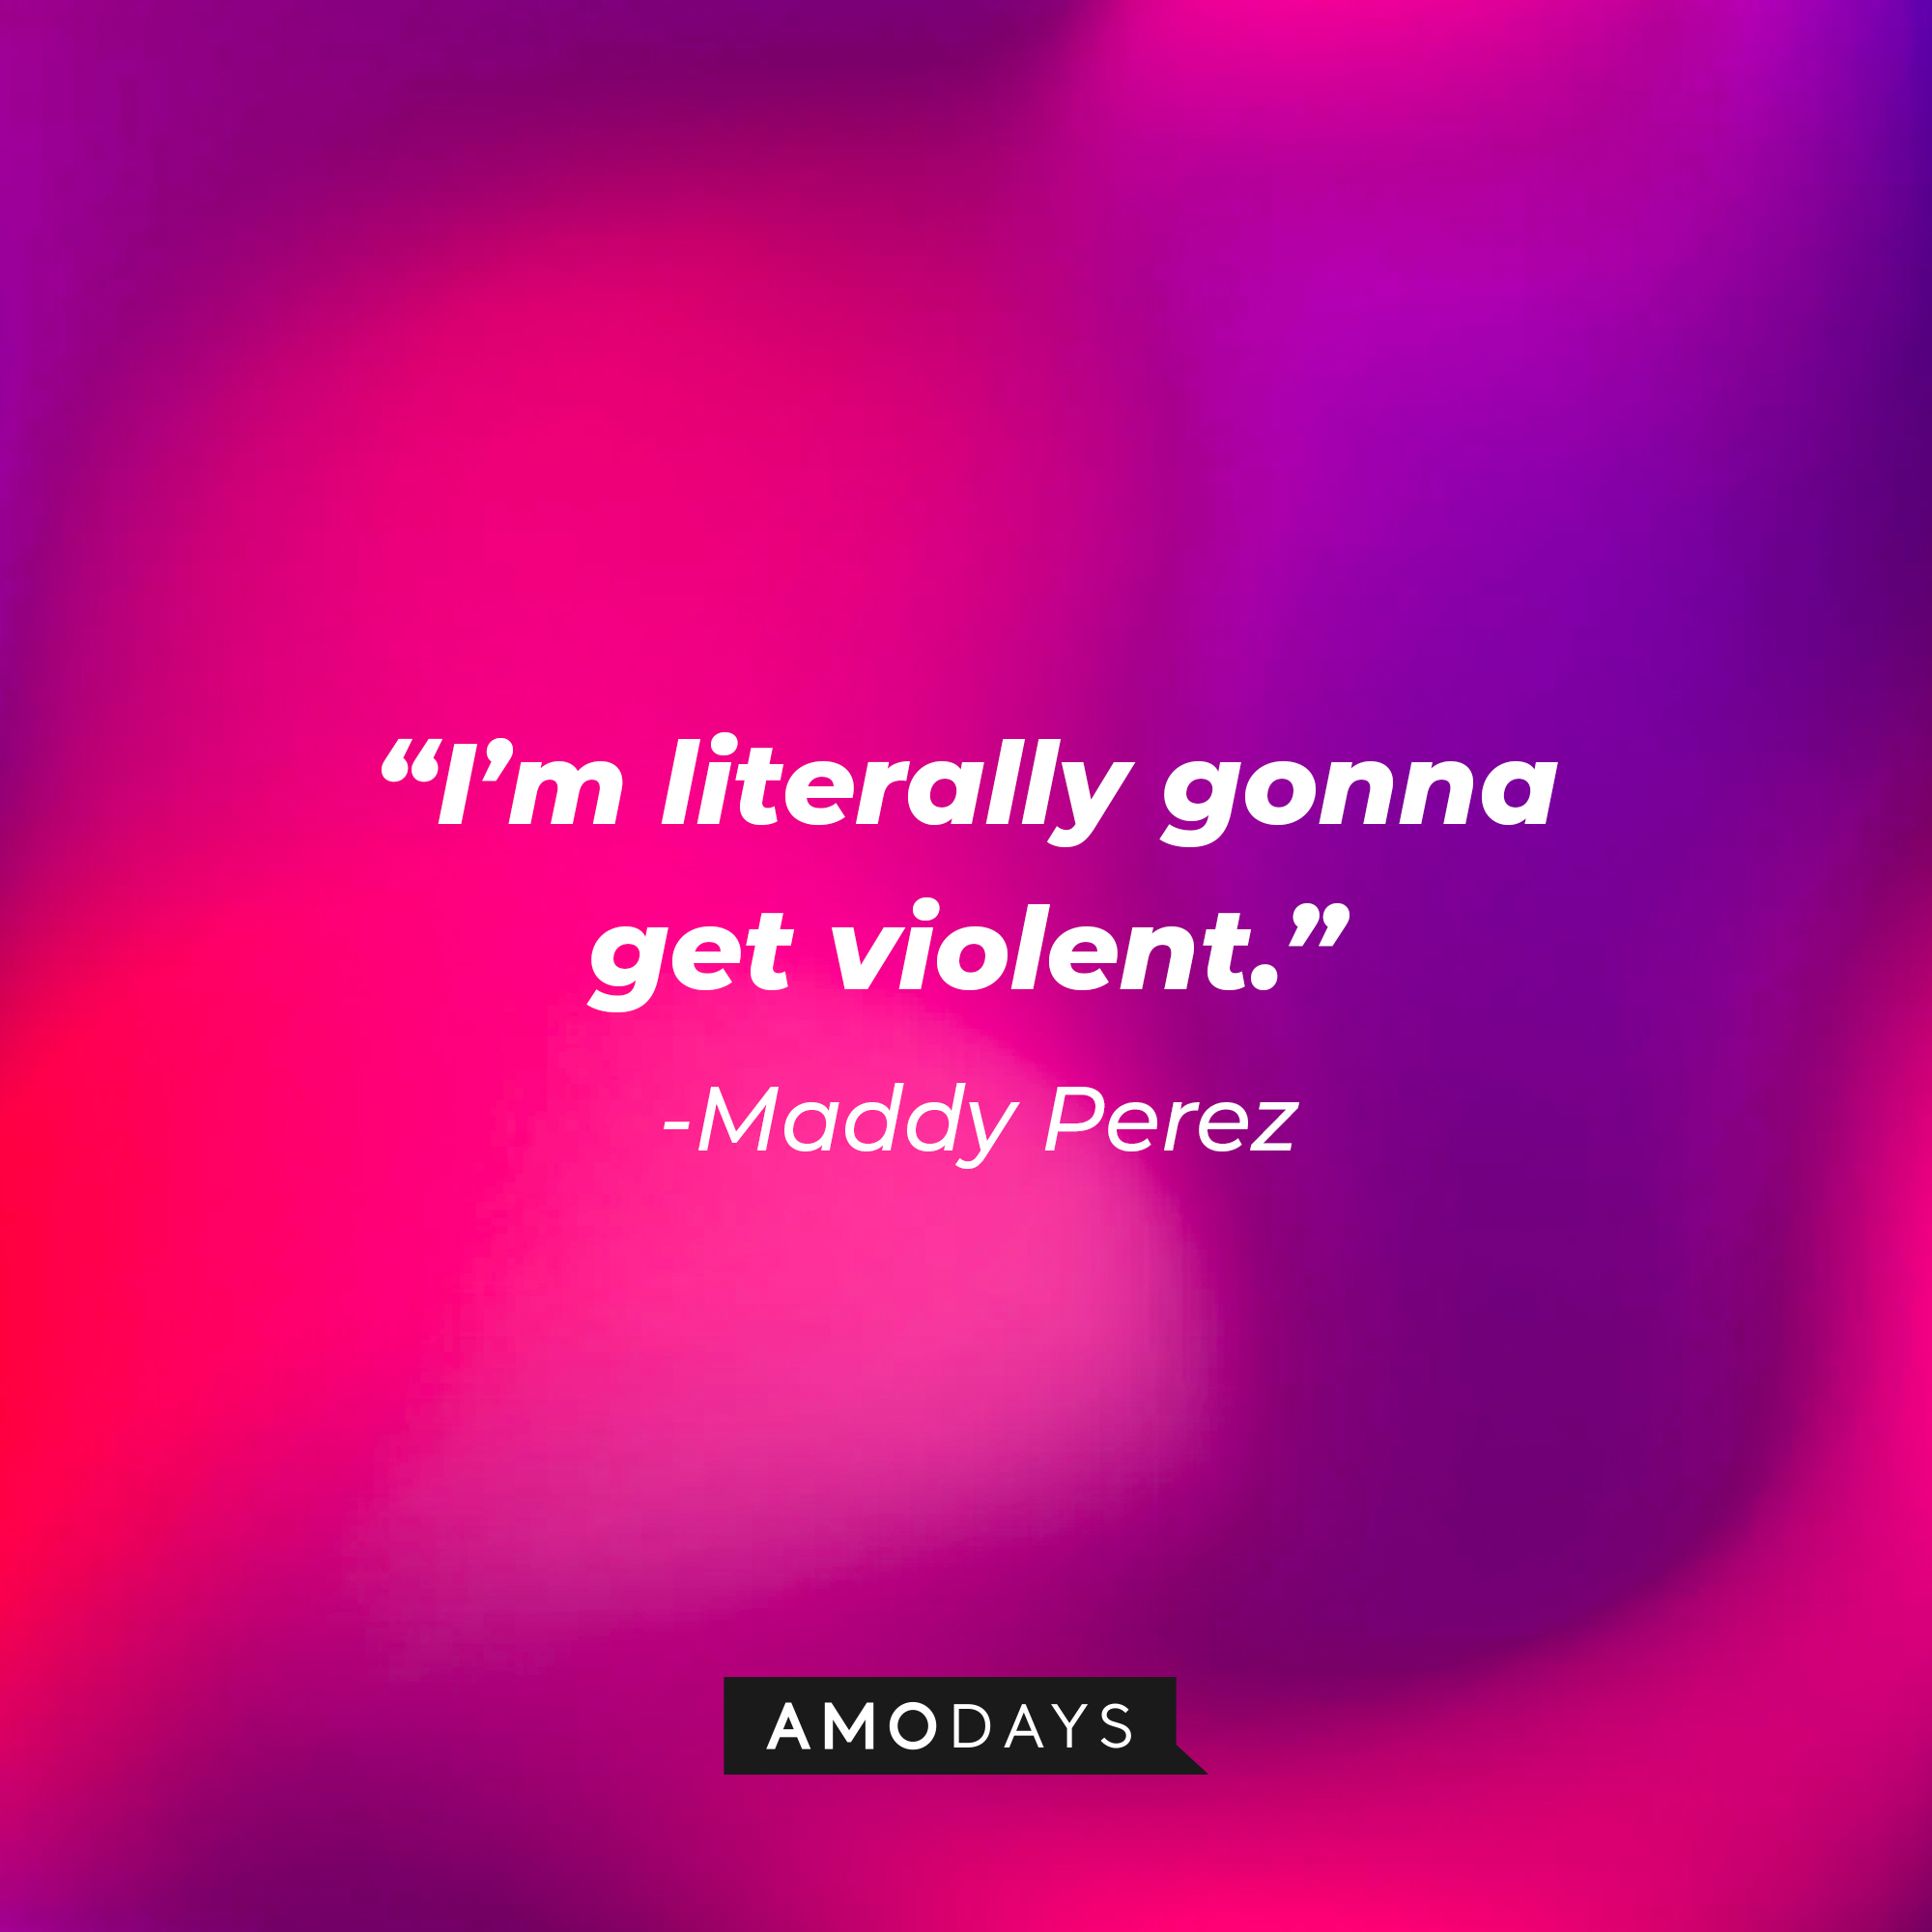 Maddy Perez’ quote: “I’m literally gonna get violent." | Source: AmoDays